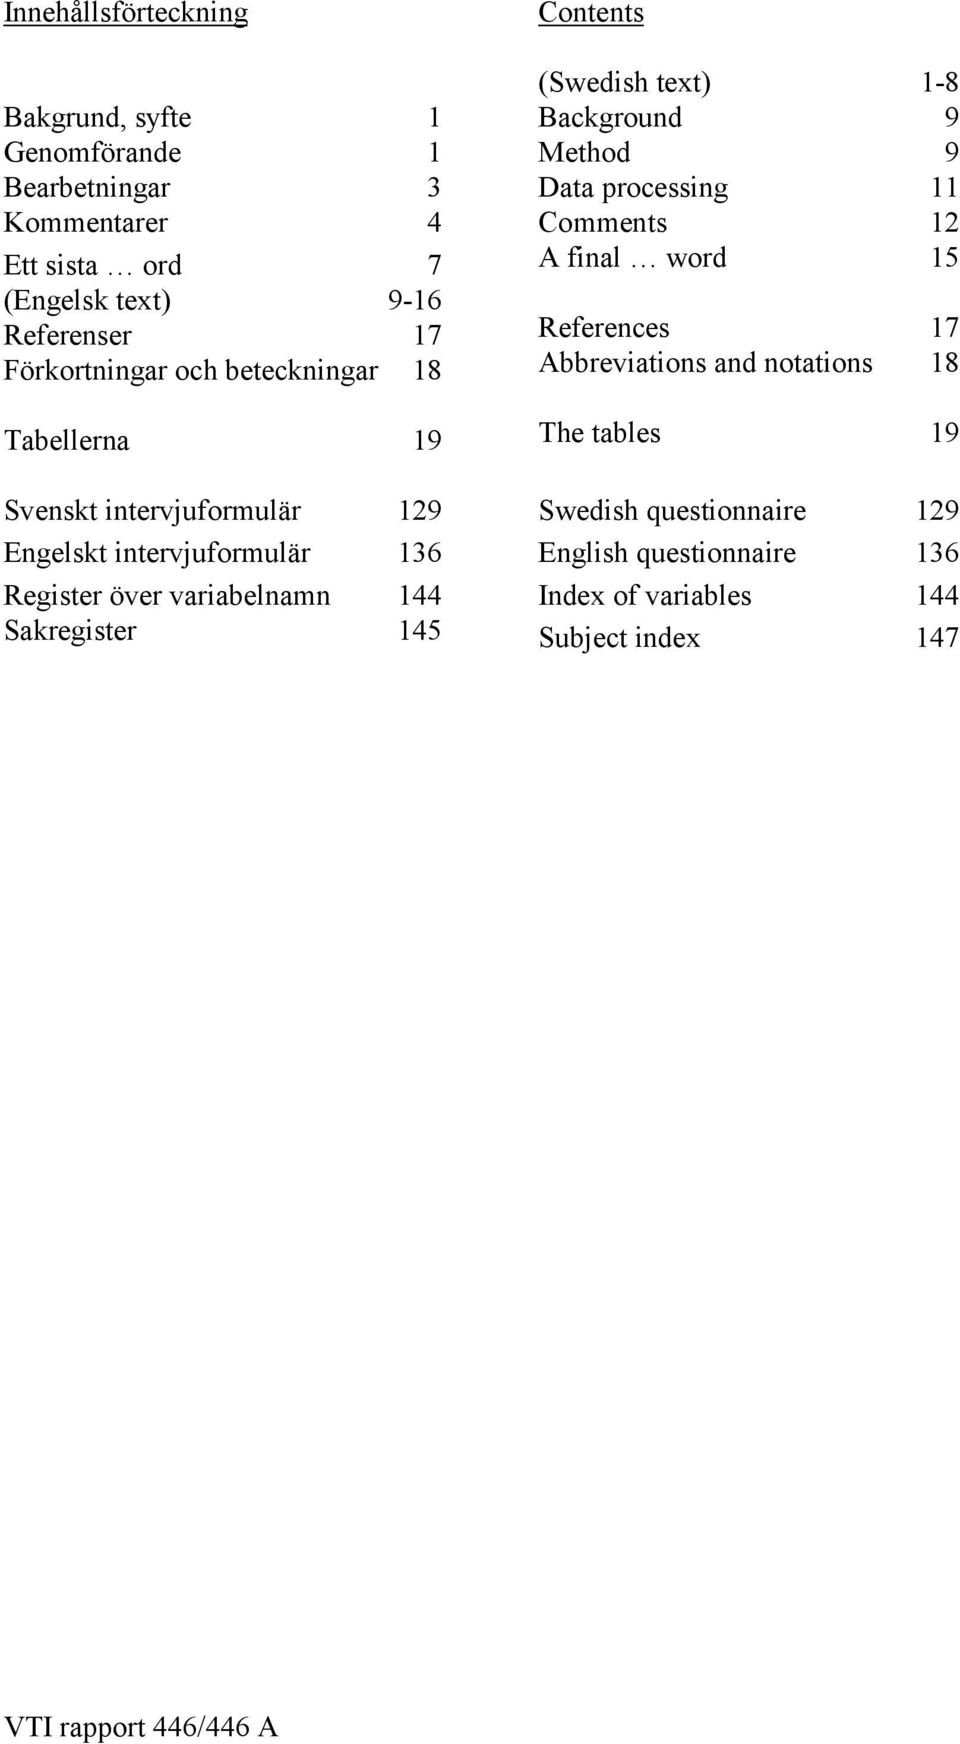 Sakregister 145 Contents (Swedish text) 1-8 Background 9 Method 9 Data processing 11 Comments 12 A final word 15 References 17